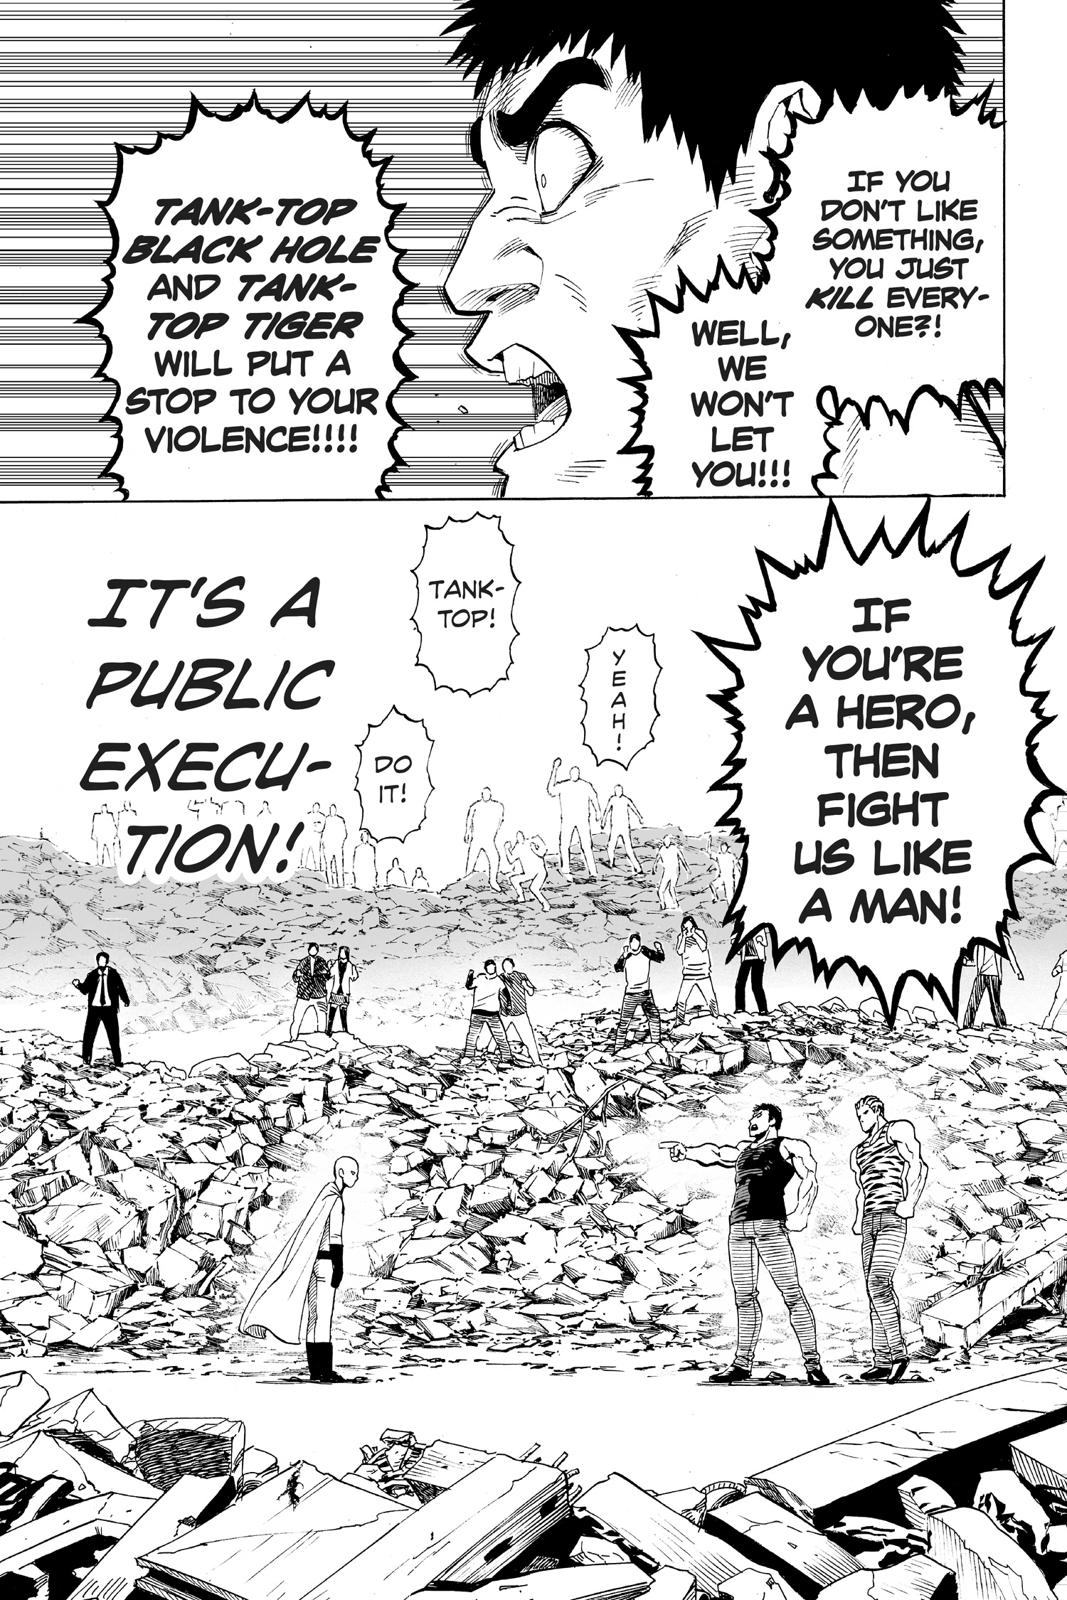 One-Punch Man, Punch 22 image 28